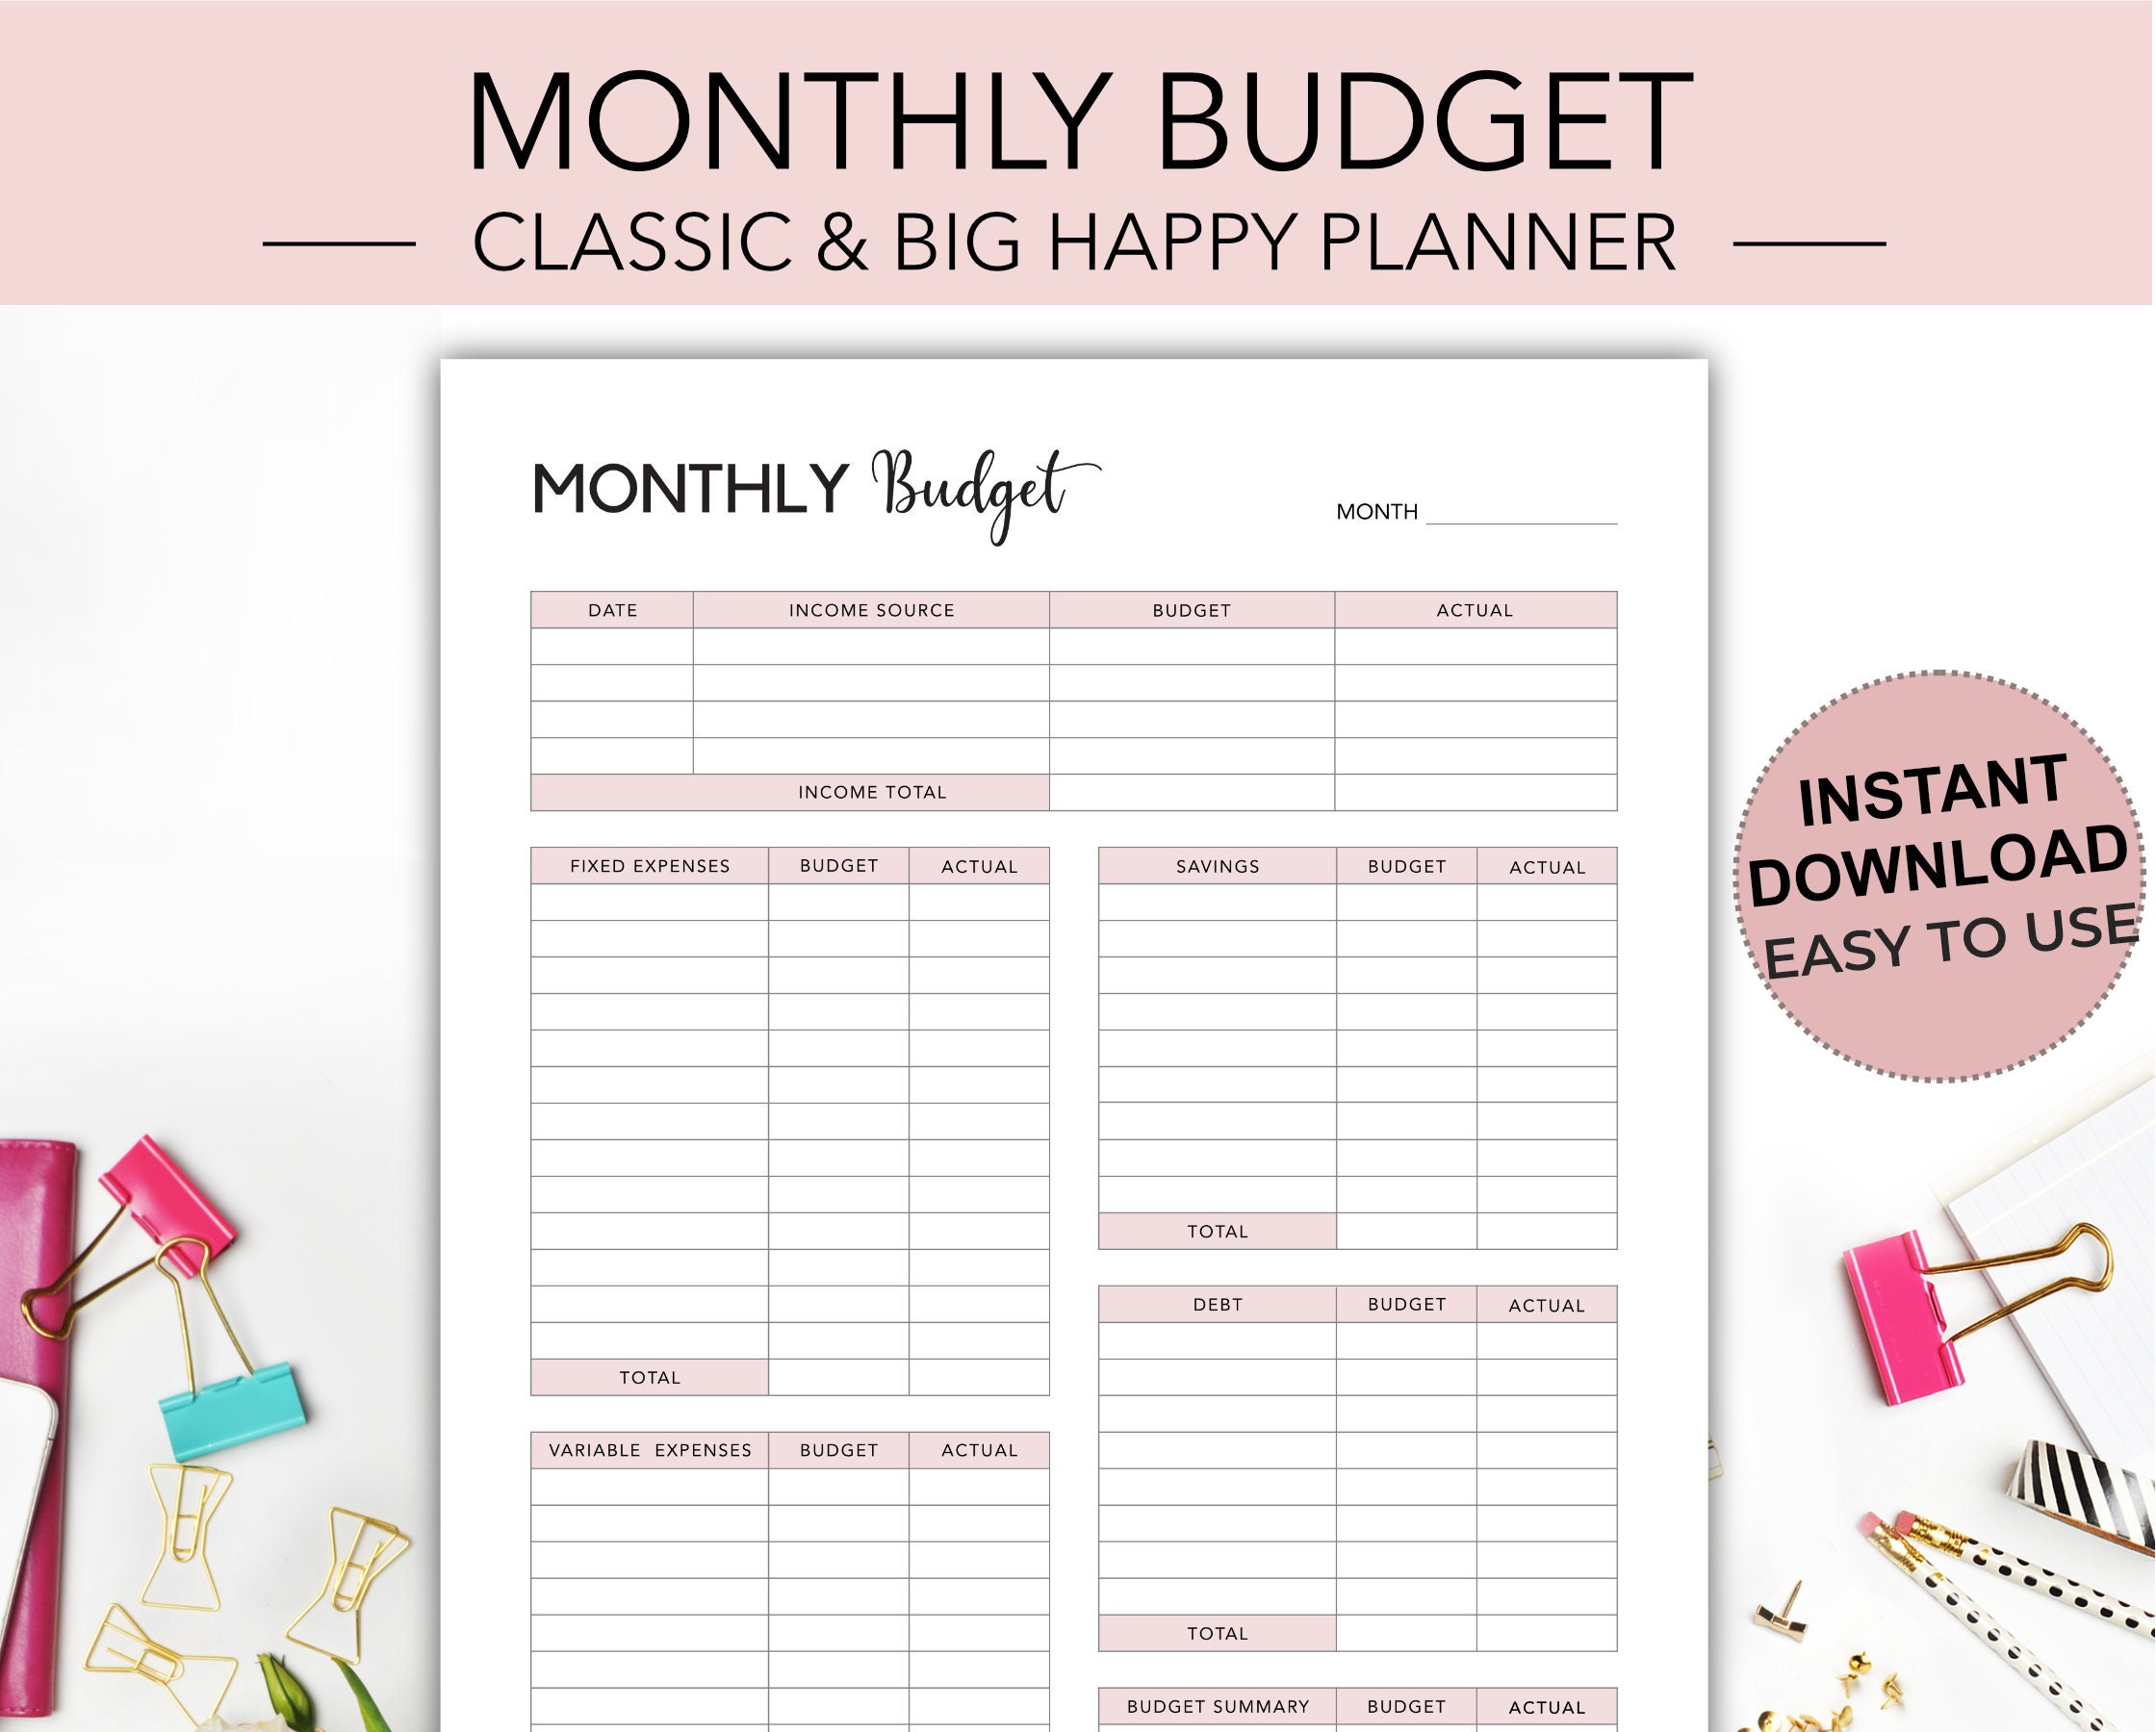 Monthly Budget and Saving Tracker Classic Planner Companion – The